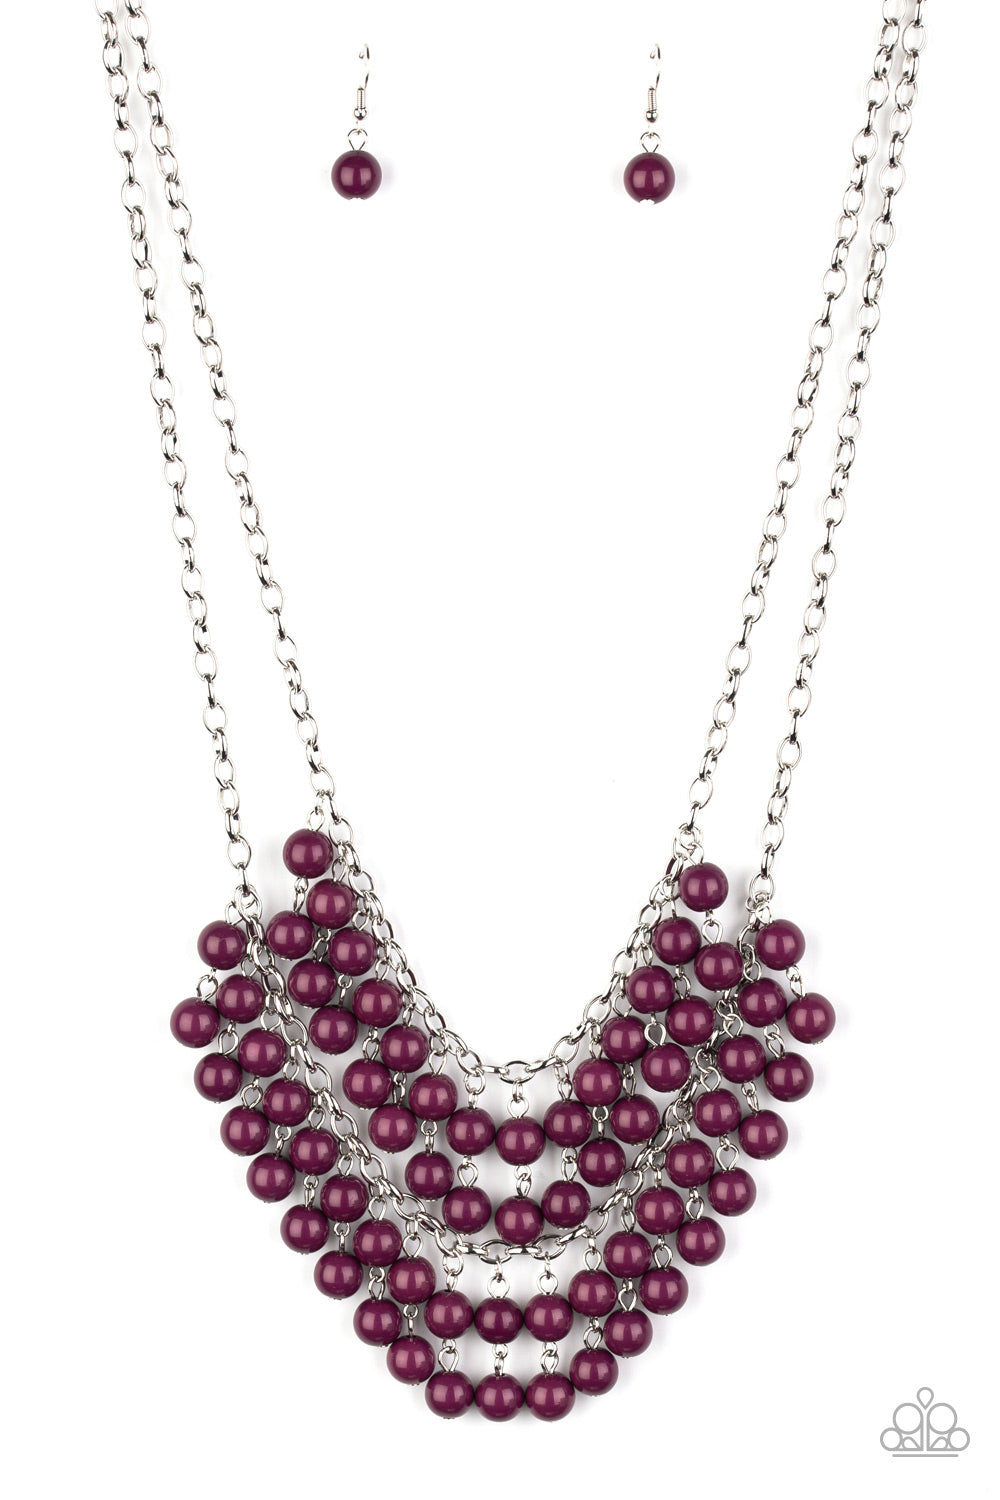 &lt;P&gt;Pairs of plum beads cascade from the bottoms of two silver chains, creating a vivaciously layered fringe below the collar. Features an adjustable clasp closure.
&lt;/p&gt;

&lt;P&gt;&lt;i&gt; Sold as one individual necklace.  Includes one pair of matching earrings.
&lt;/i&gt;&lt;/p&gt;

&lt;img src=\&quot;https://d9b54x484lq62.cloudfront.net/paparazzi/shopping/images/517_tag150x115_1.png\&quot; alt=\&quot;New Kit\&quot; align=\&quot;middle\&quot; height=\&quot;50\&quot; width=\&quot;50\&quot;/&gt;